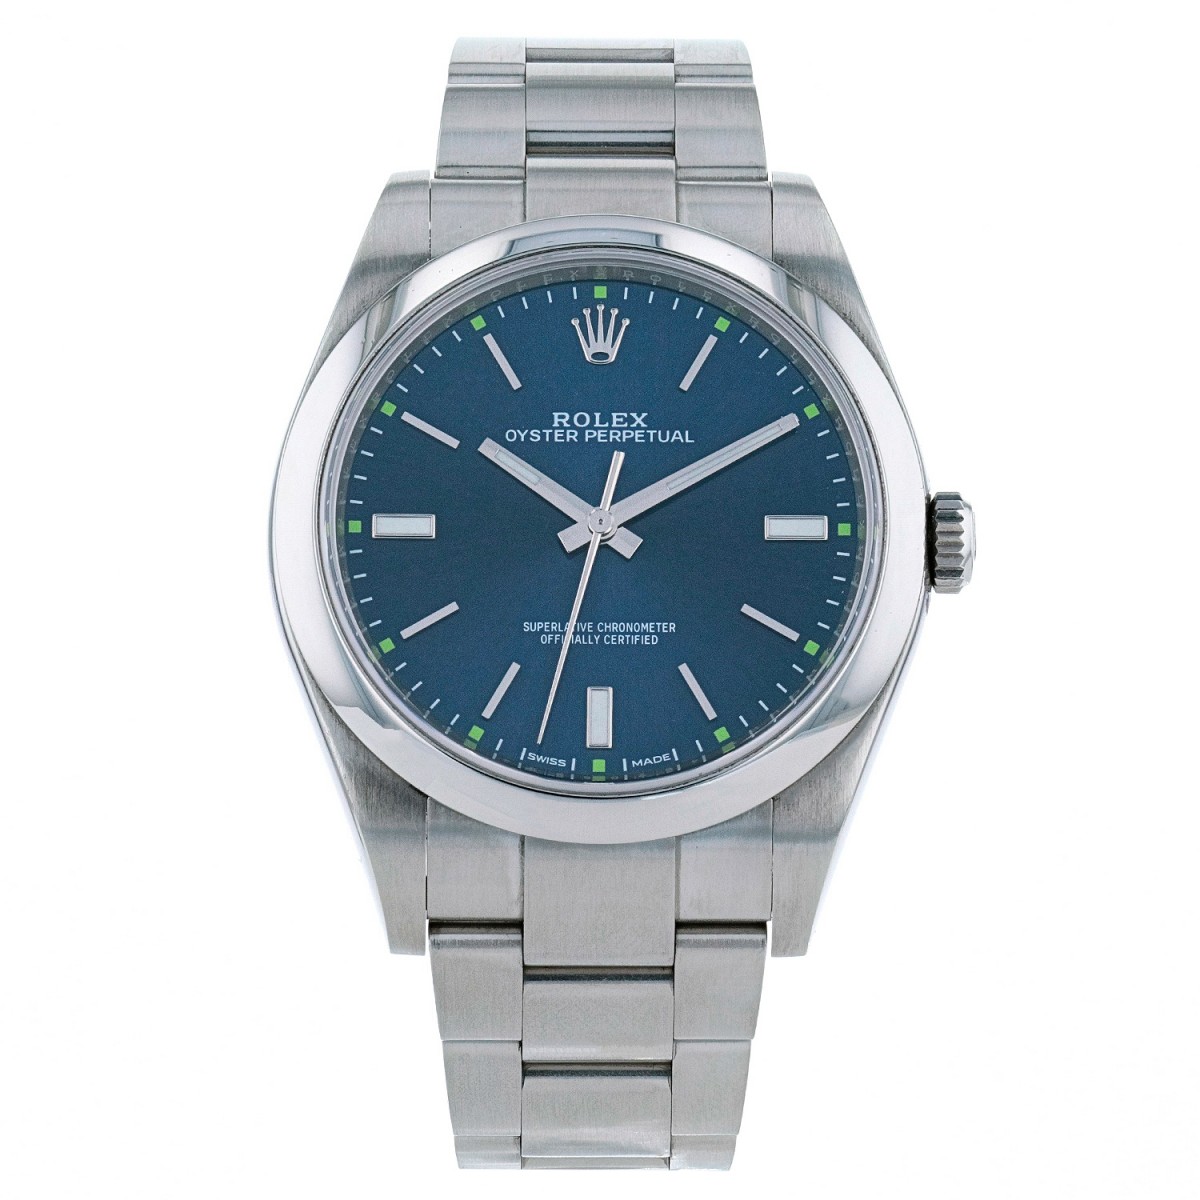 Montre Rolex Oyster Perpetual Vers 2018